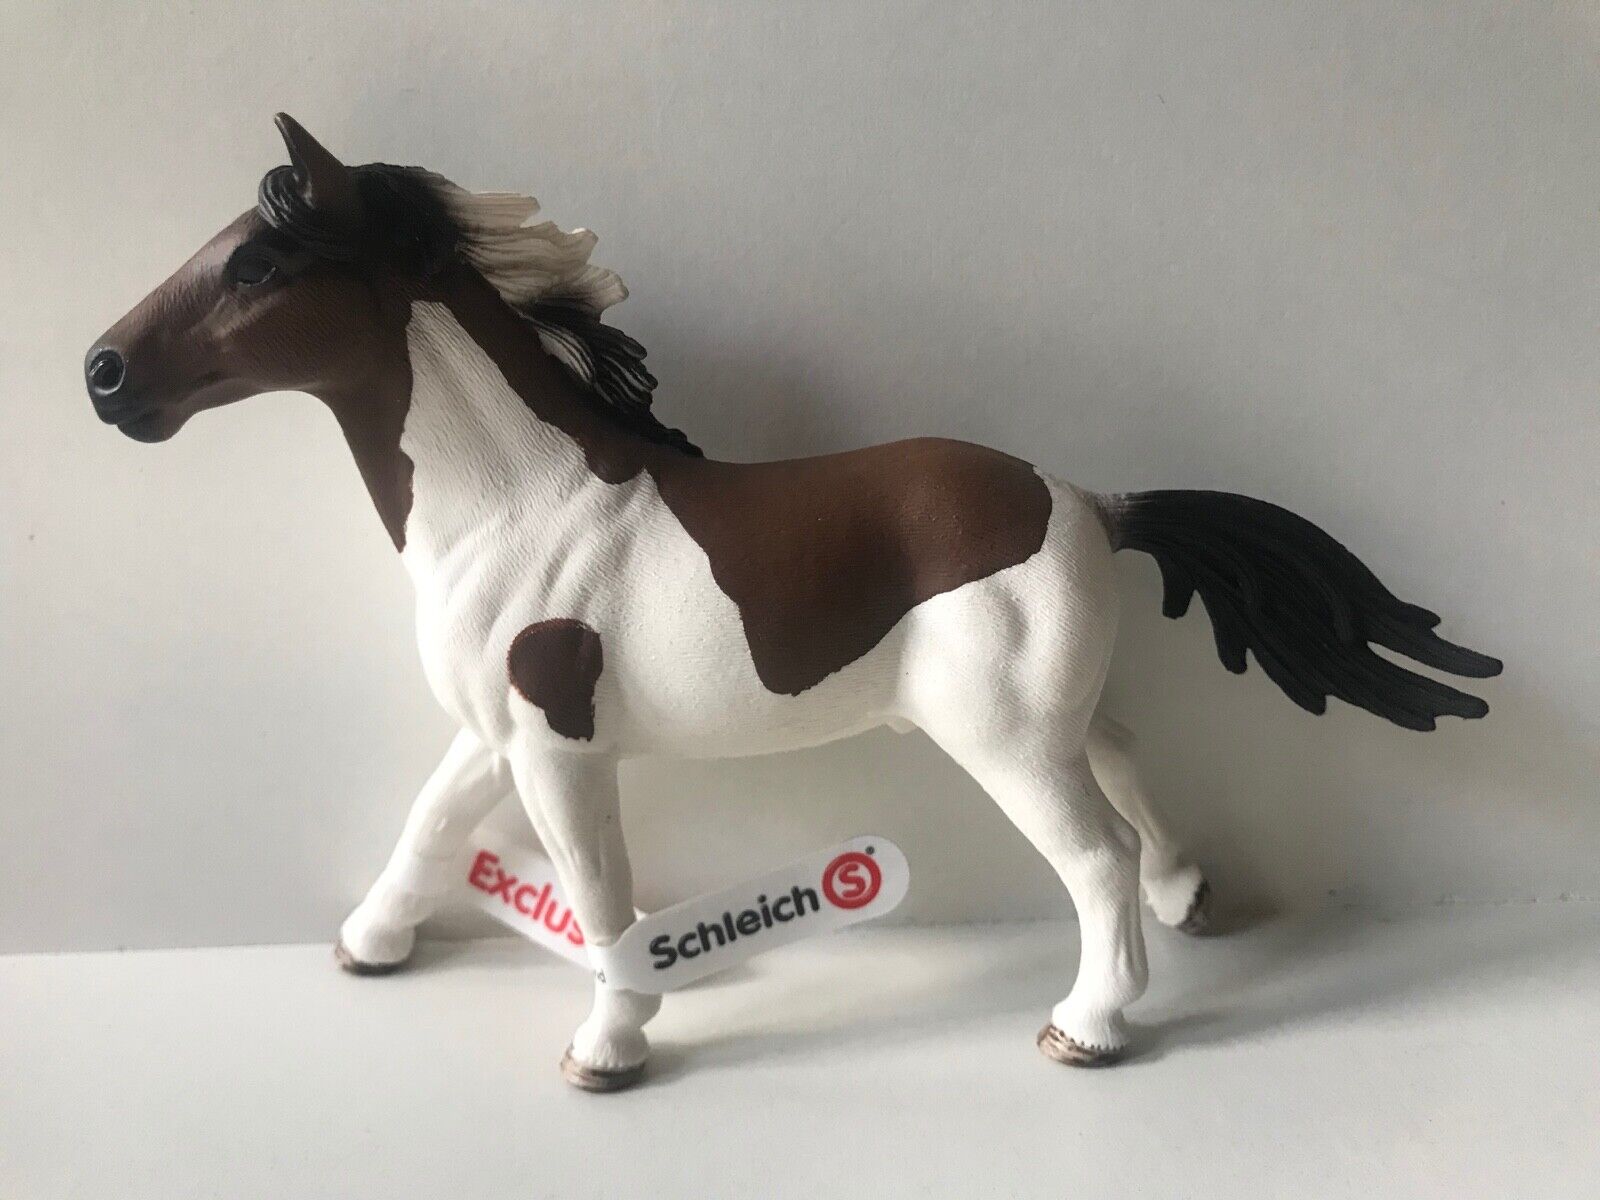 Schleich Horses Exclusive Special Horse 2019 Choose From 72142 - 72144 NEW New